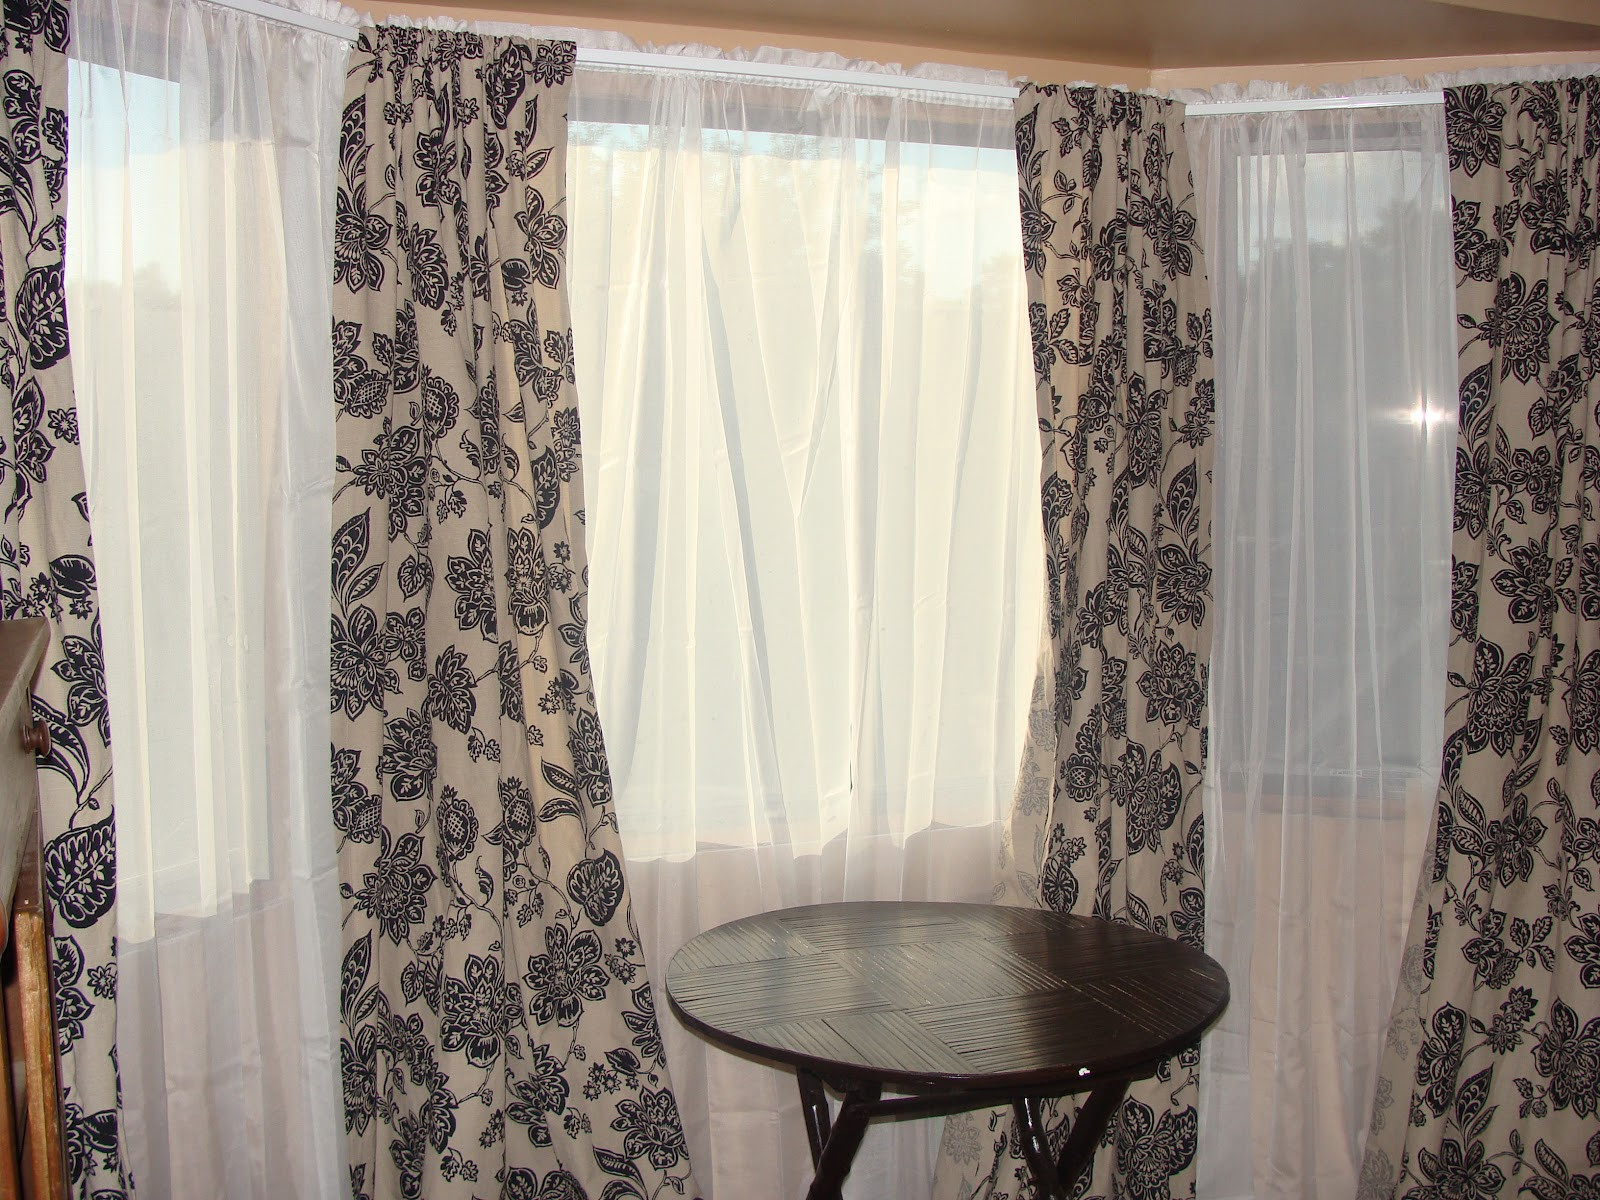 Jcpenney Living Room Curtains
 Jcpenney Sheer Curtains With Valance Drapes Interior